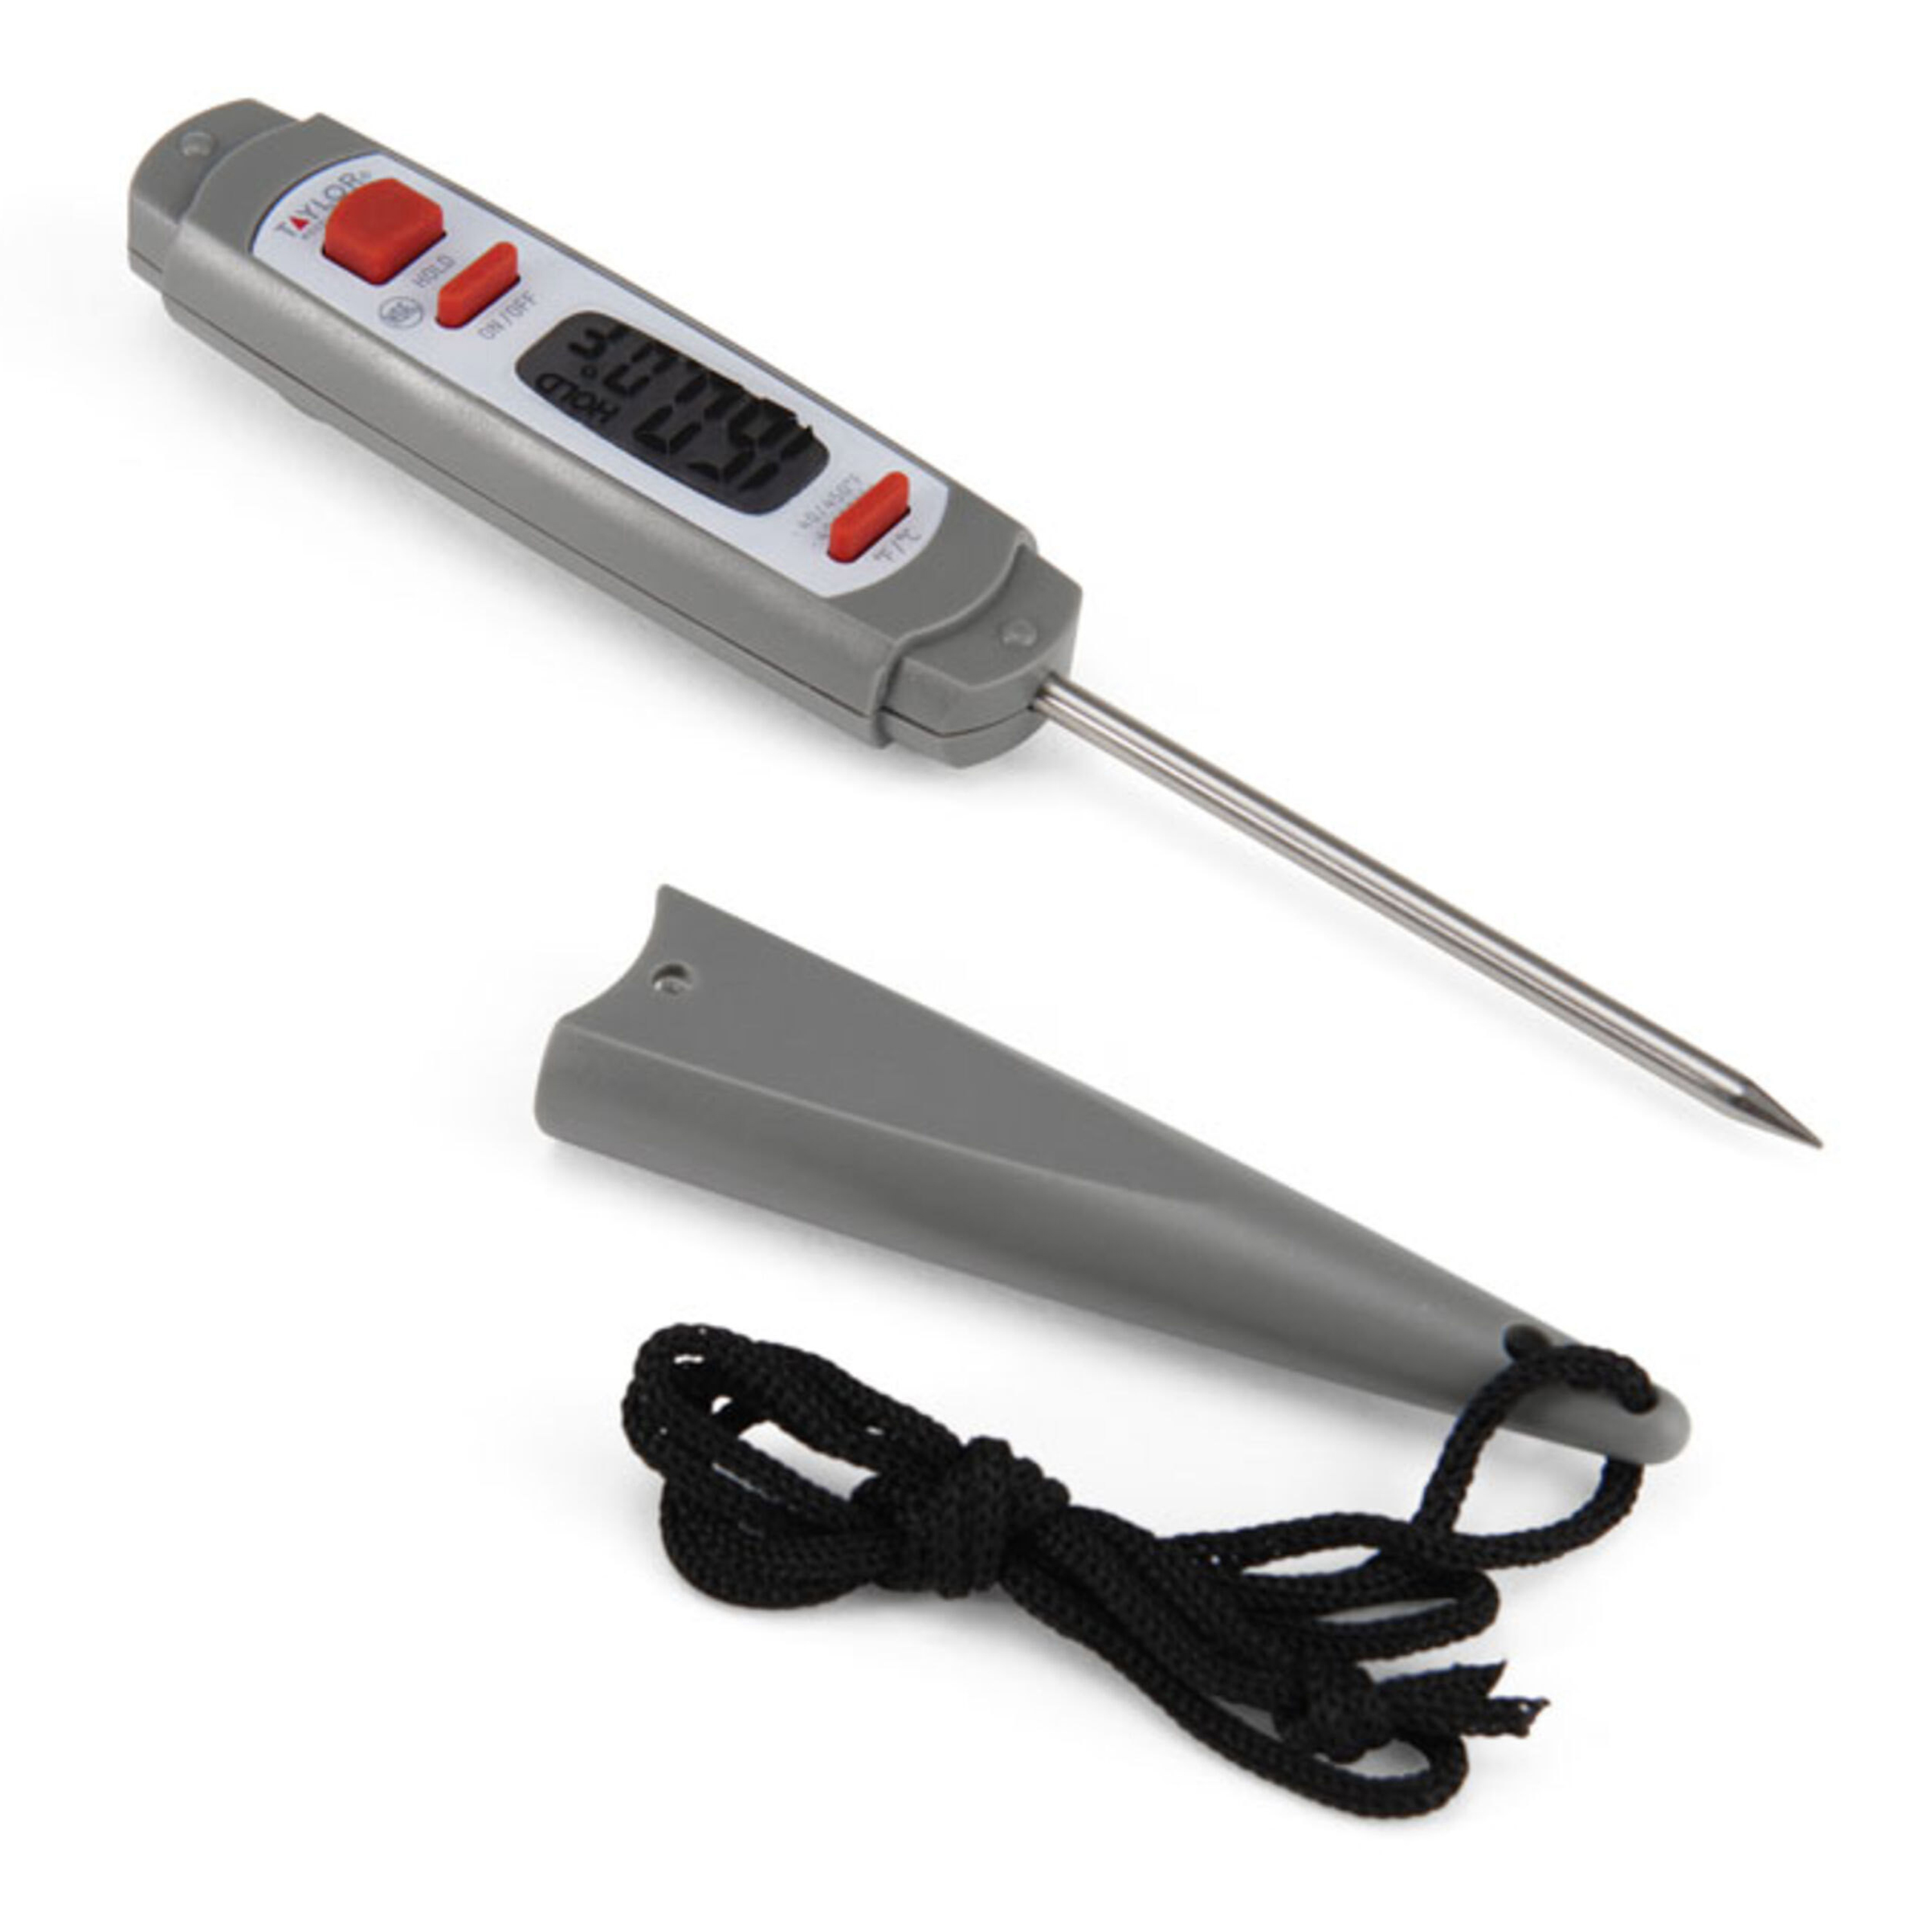 Digital Kitchen Food Thermometer cheese thermometer candy meat etc